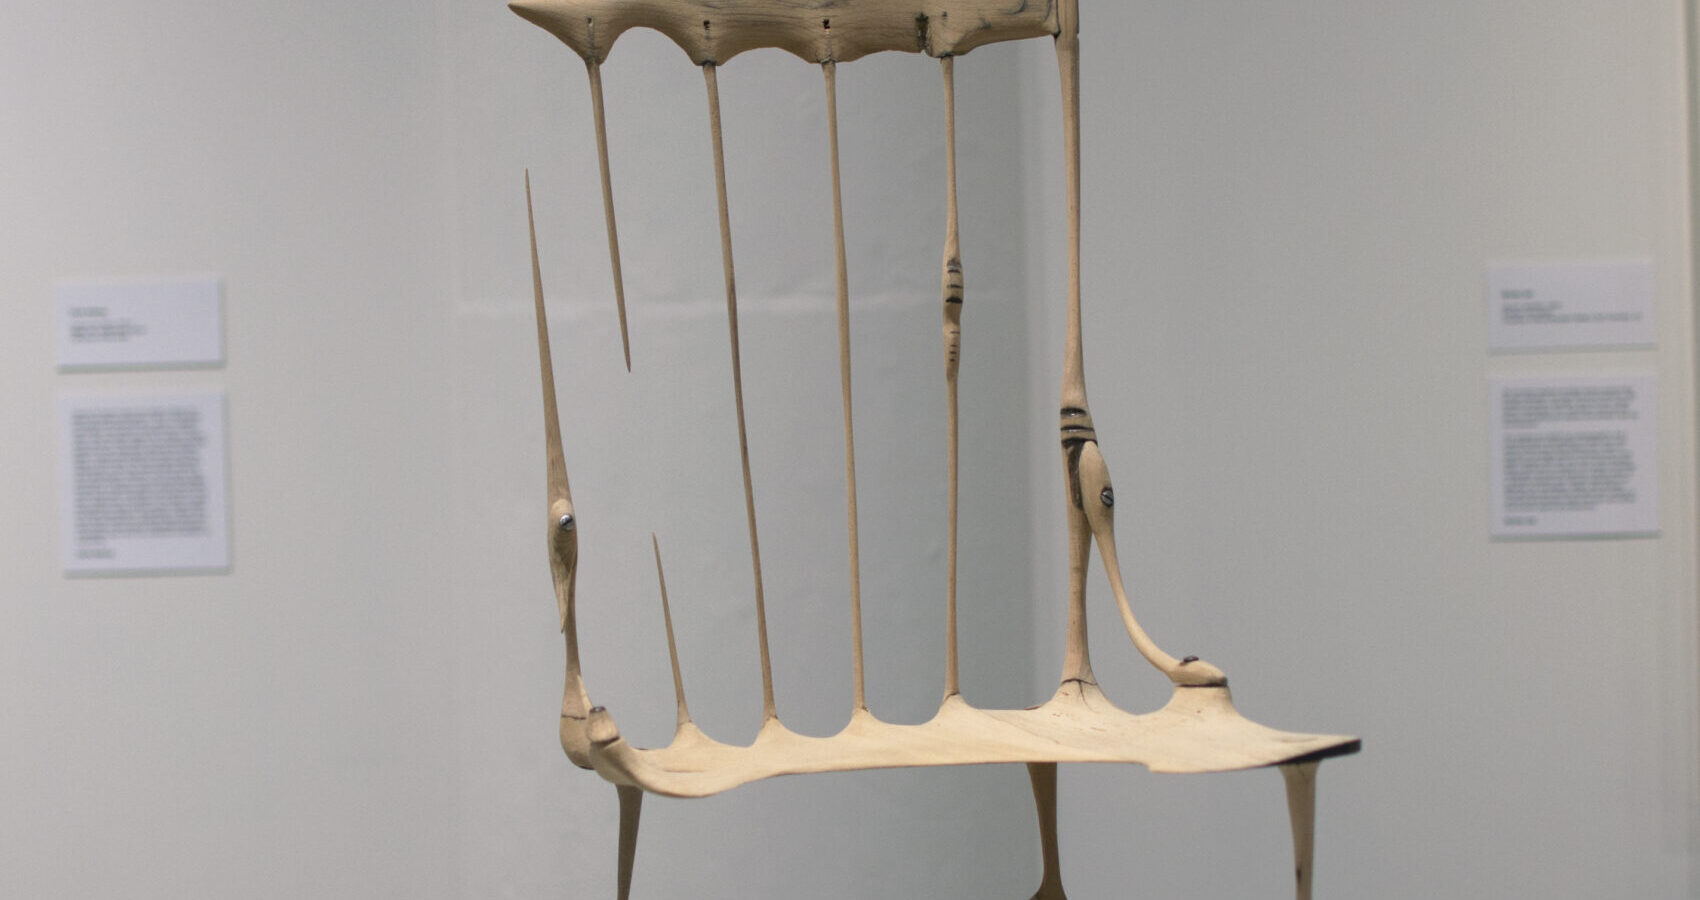 Photo of a Wooden chair art piece in an exhibition